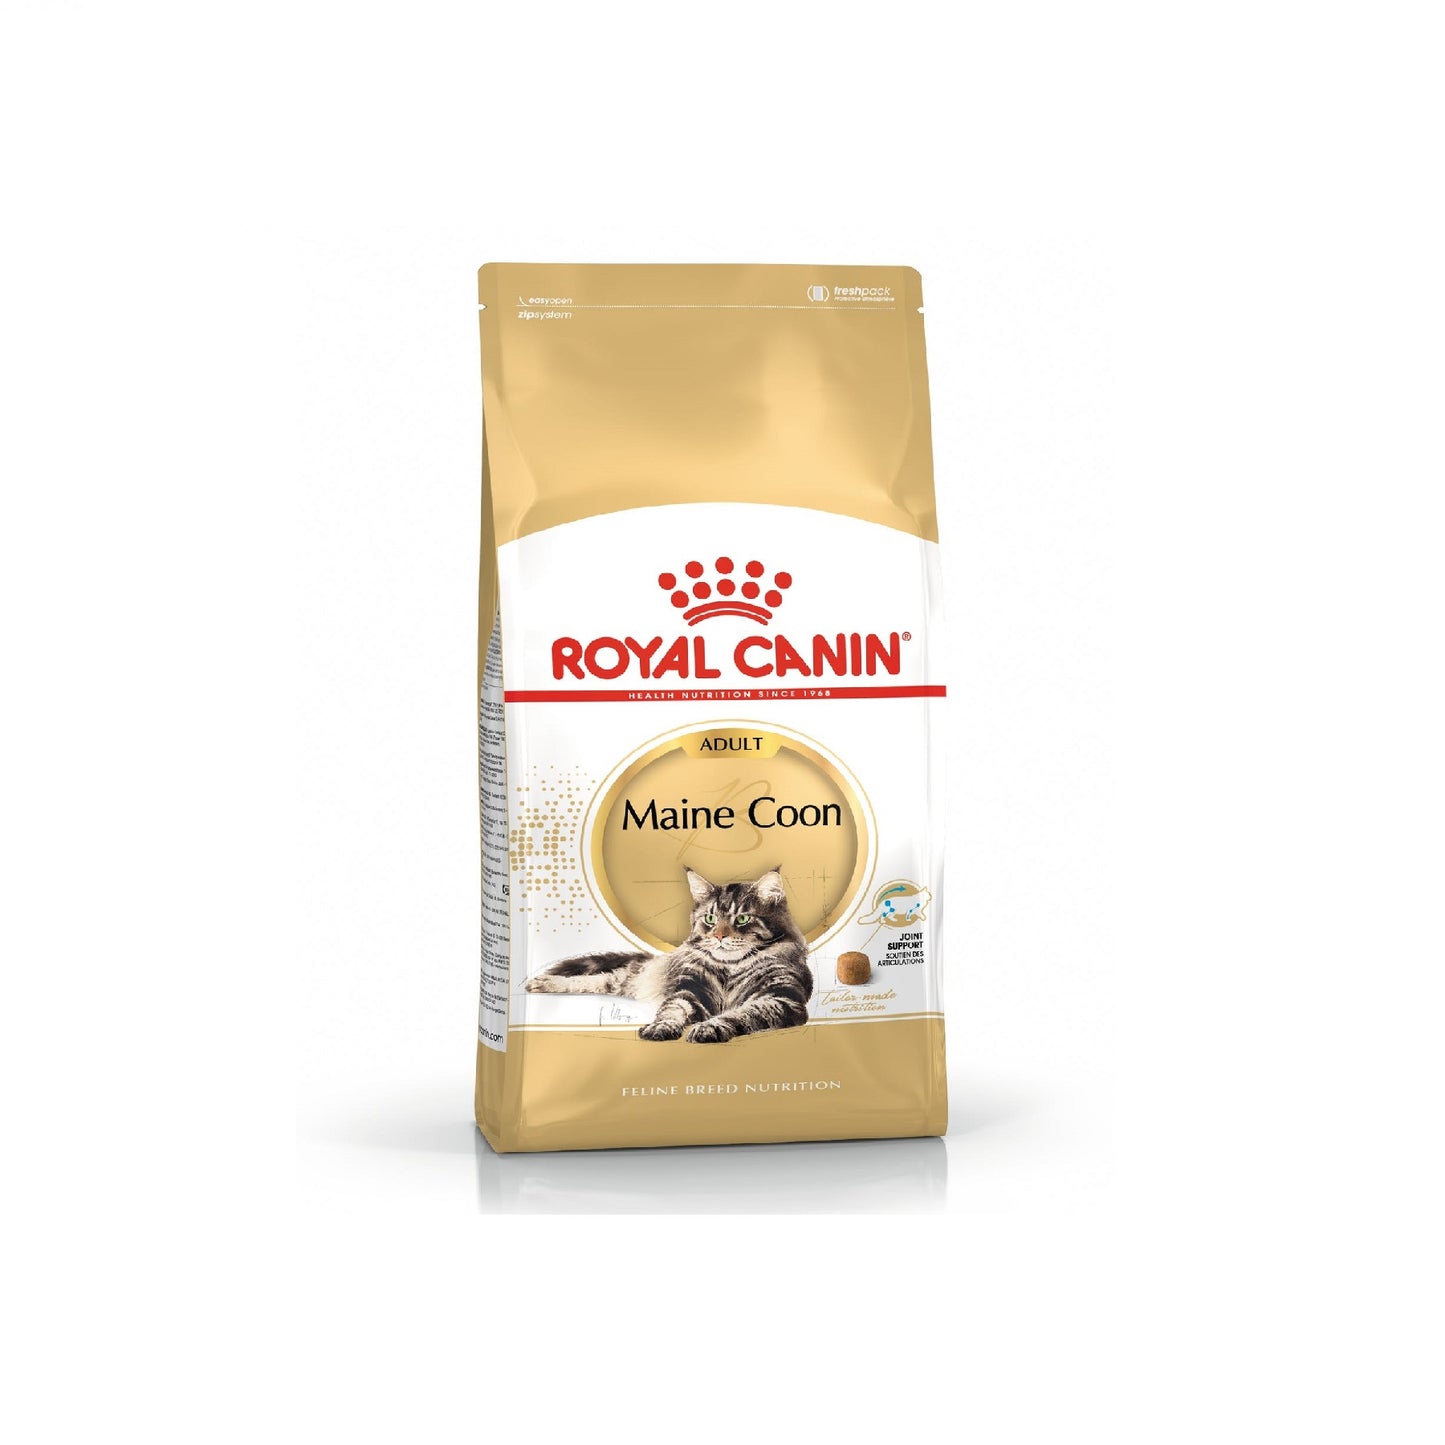 ROYAL CANIN - Maine Coon Adult